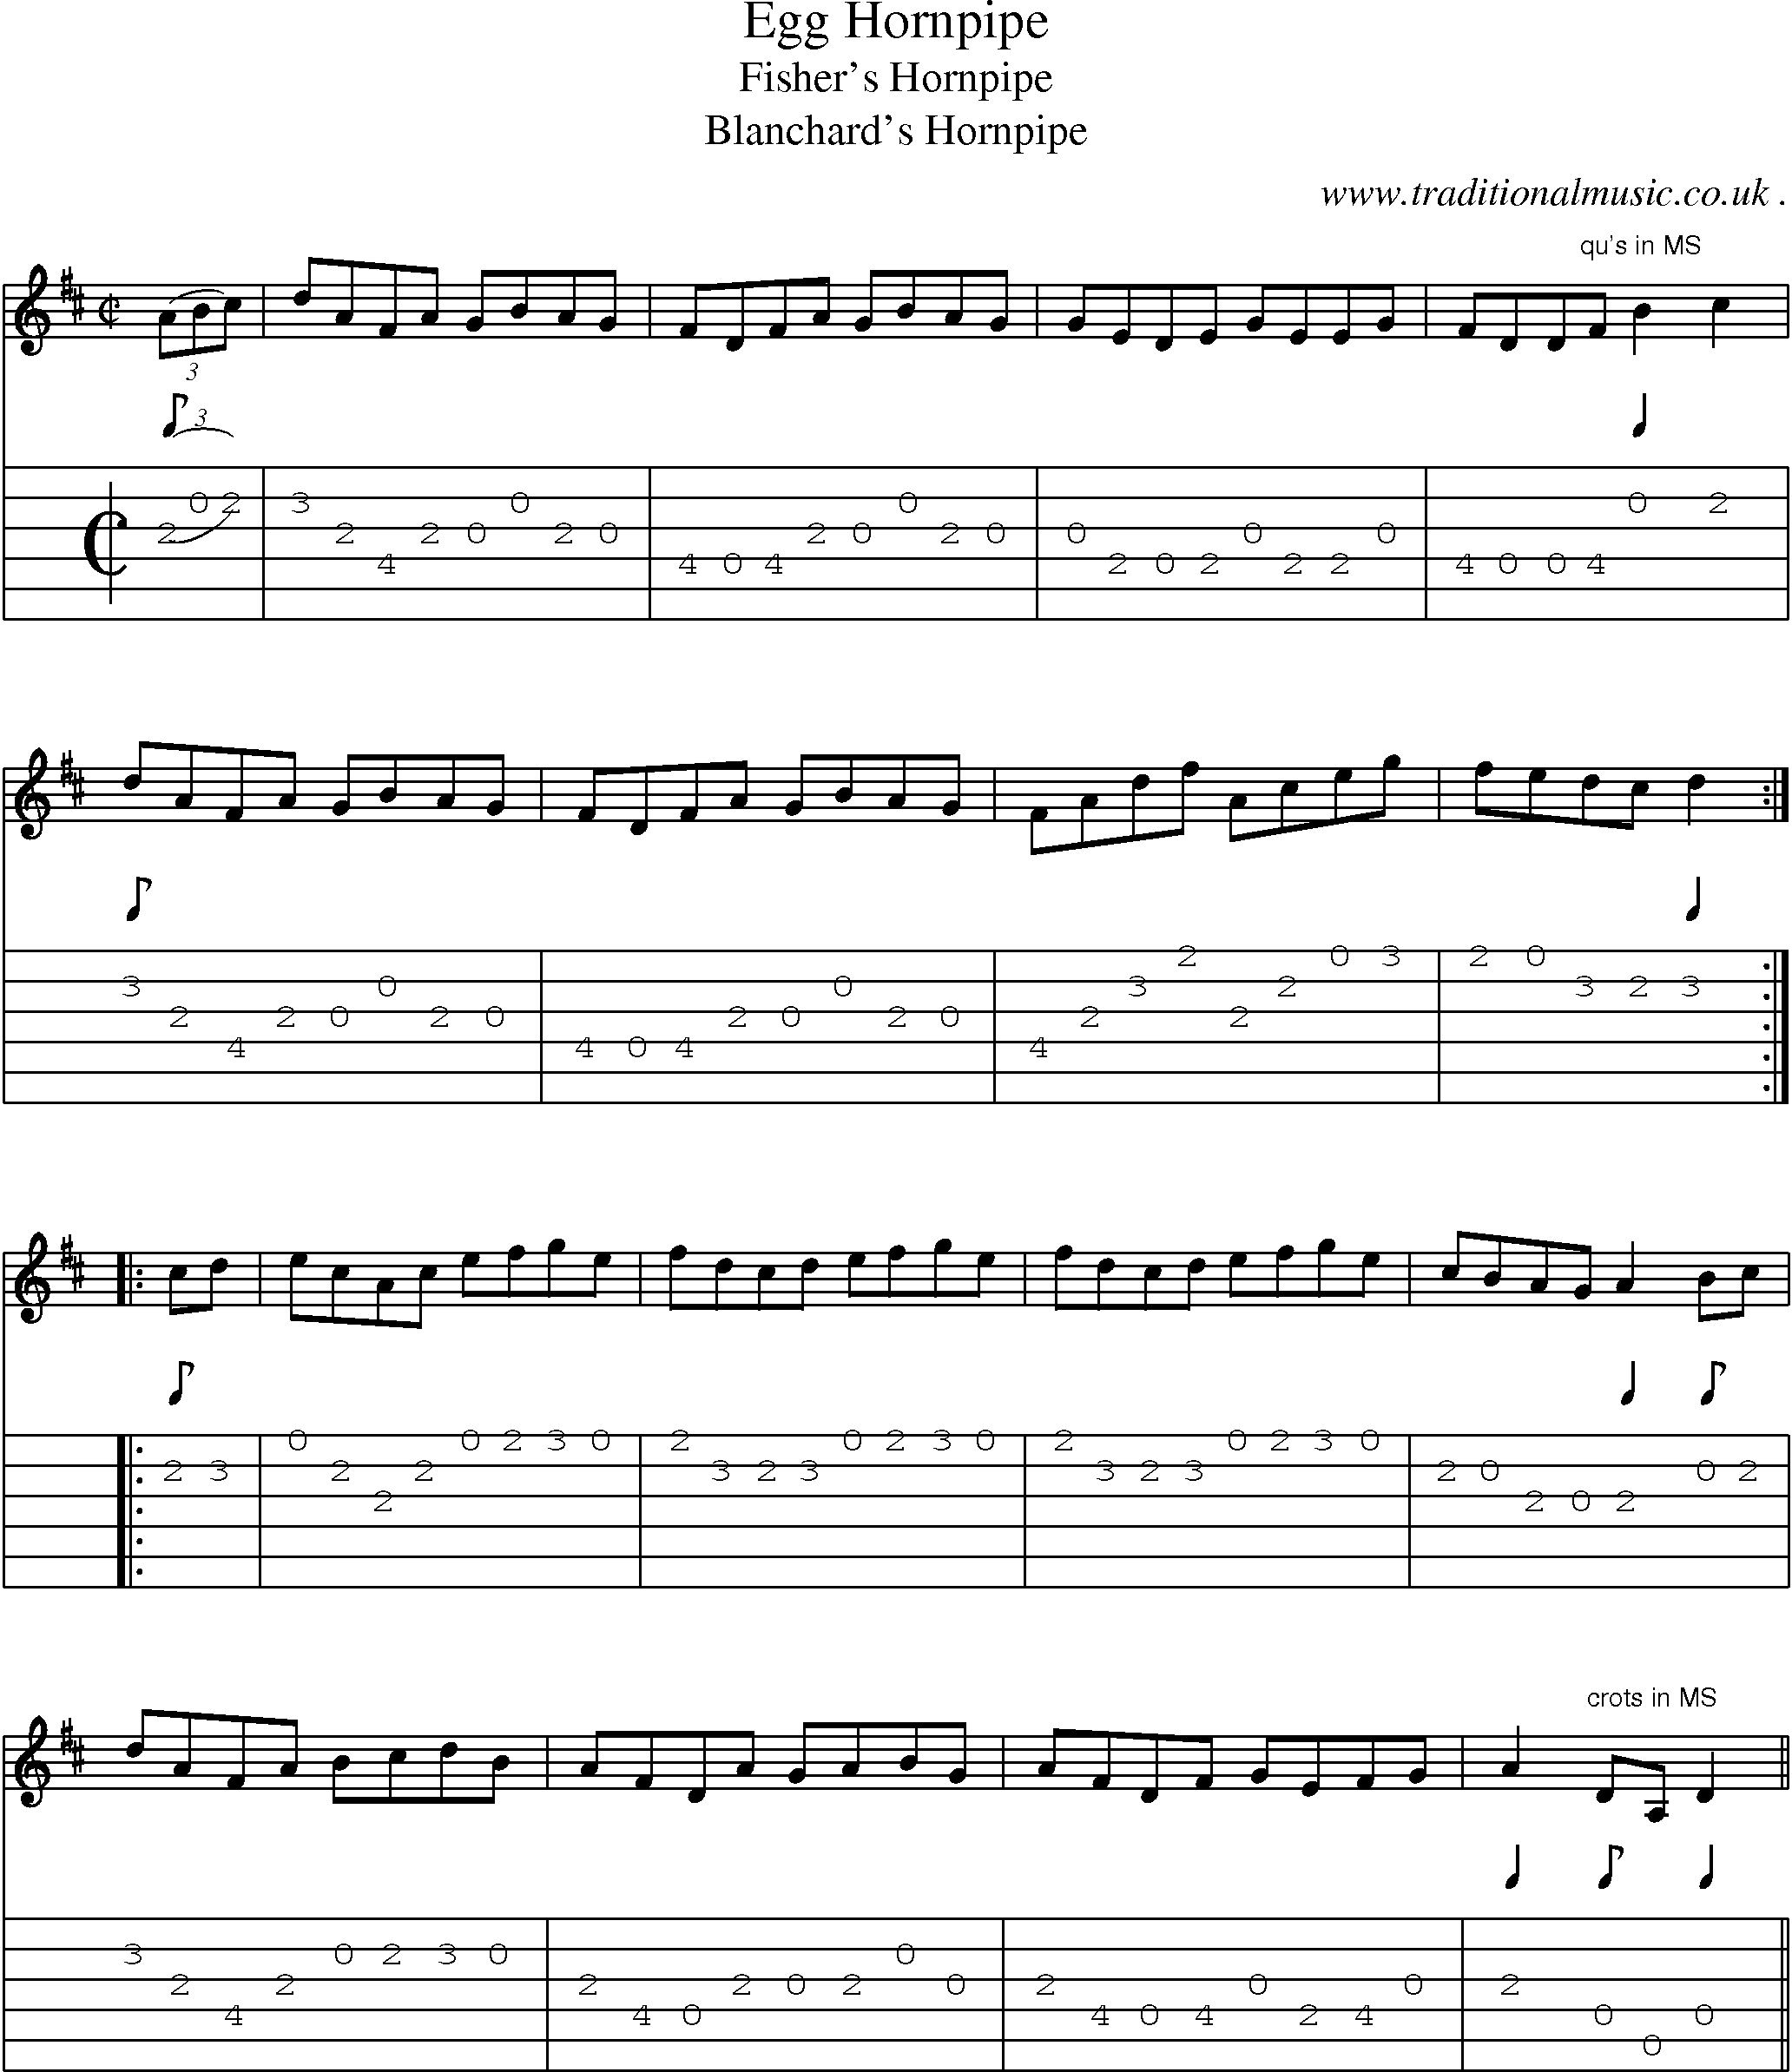 Sheet-Music and Guitar Tabs for Egg Hornpipe